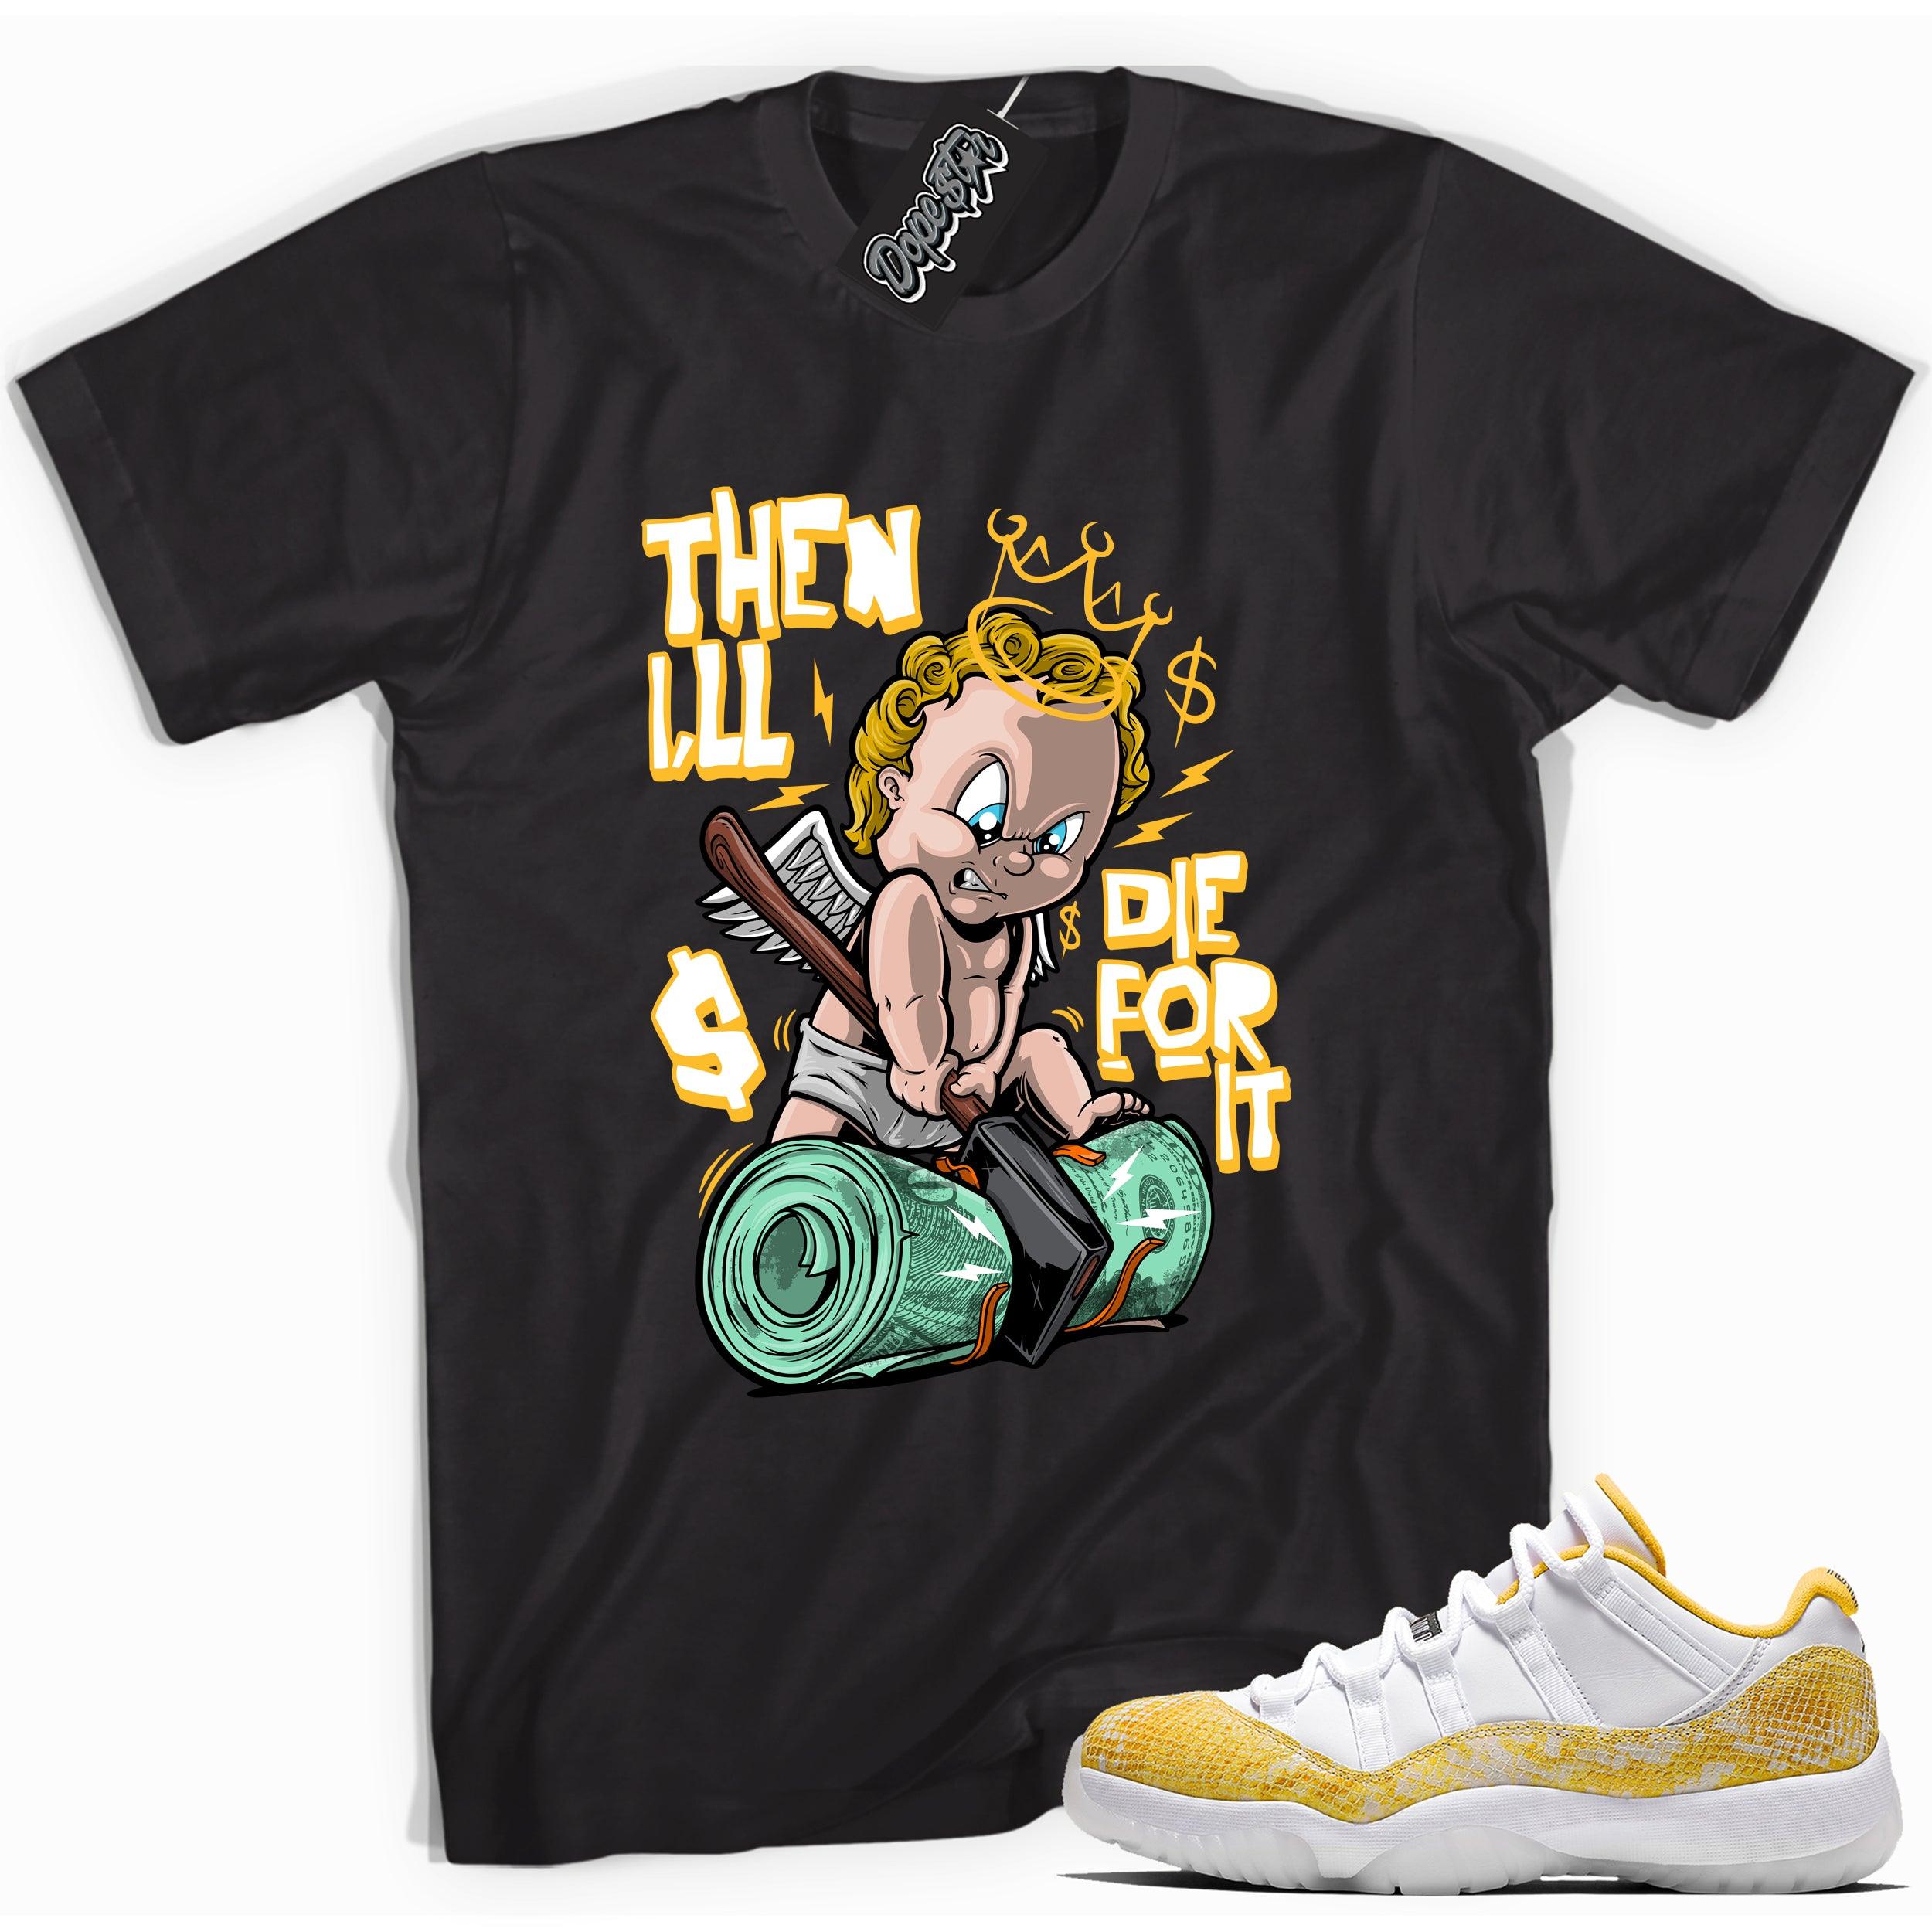 Cool black graphic tee with 'then i'll die for it' print, that perfectly matches  Air Jordan 11 Retro Low Yellow Snakeskin sneakers